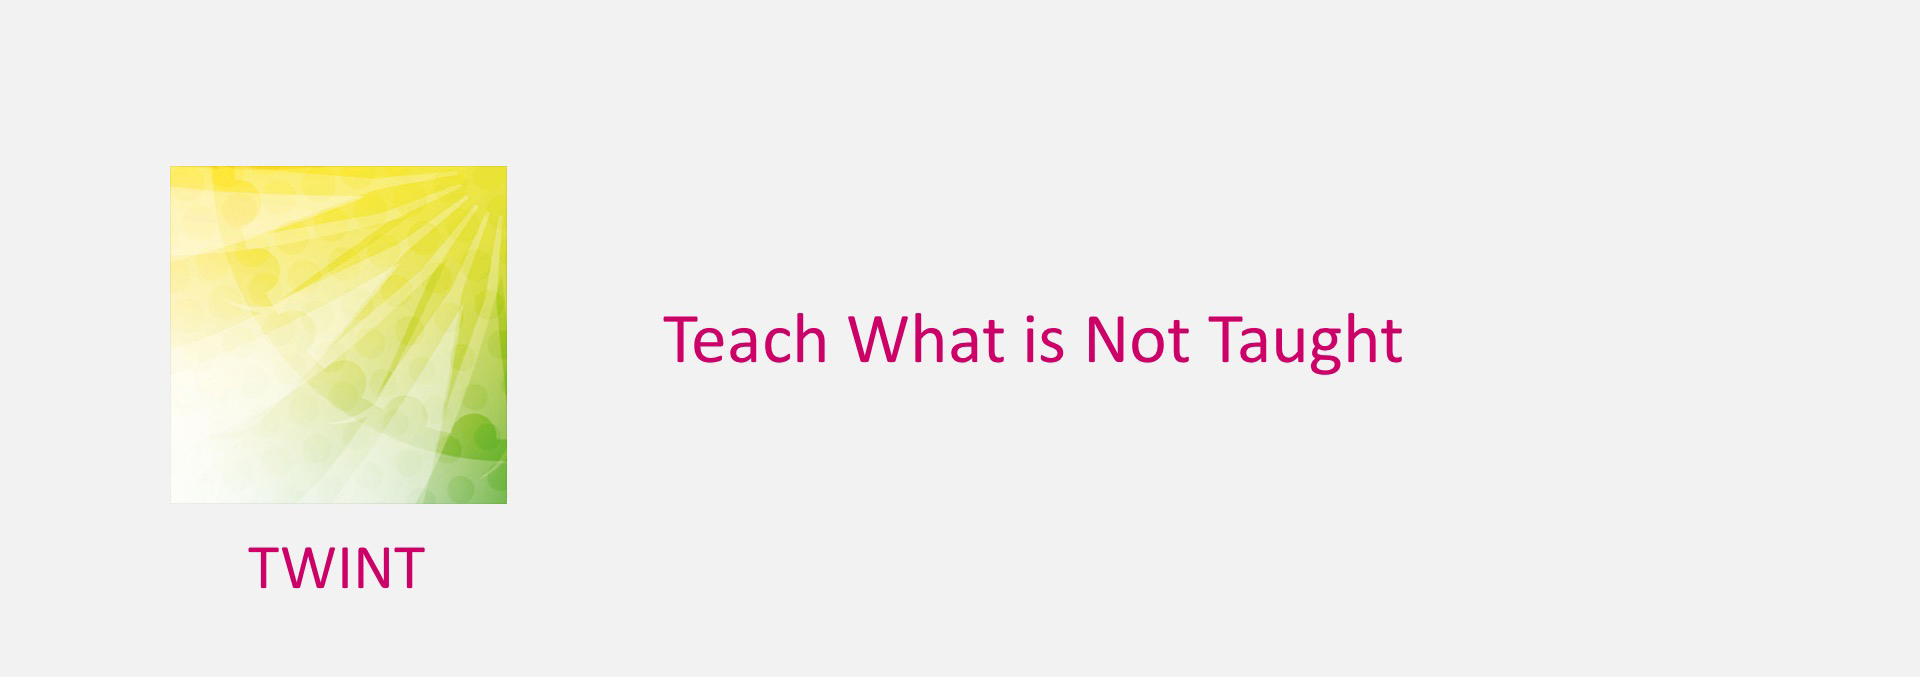 Teach What Isn't Taught